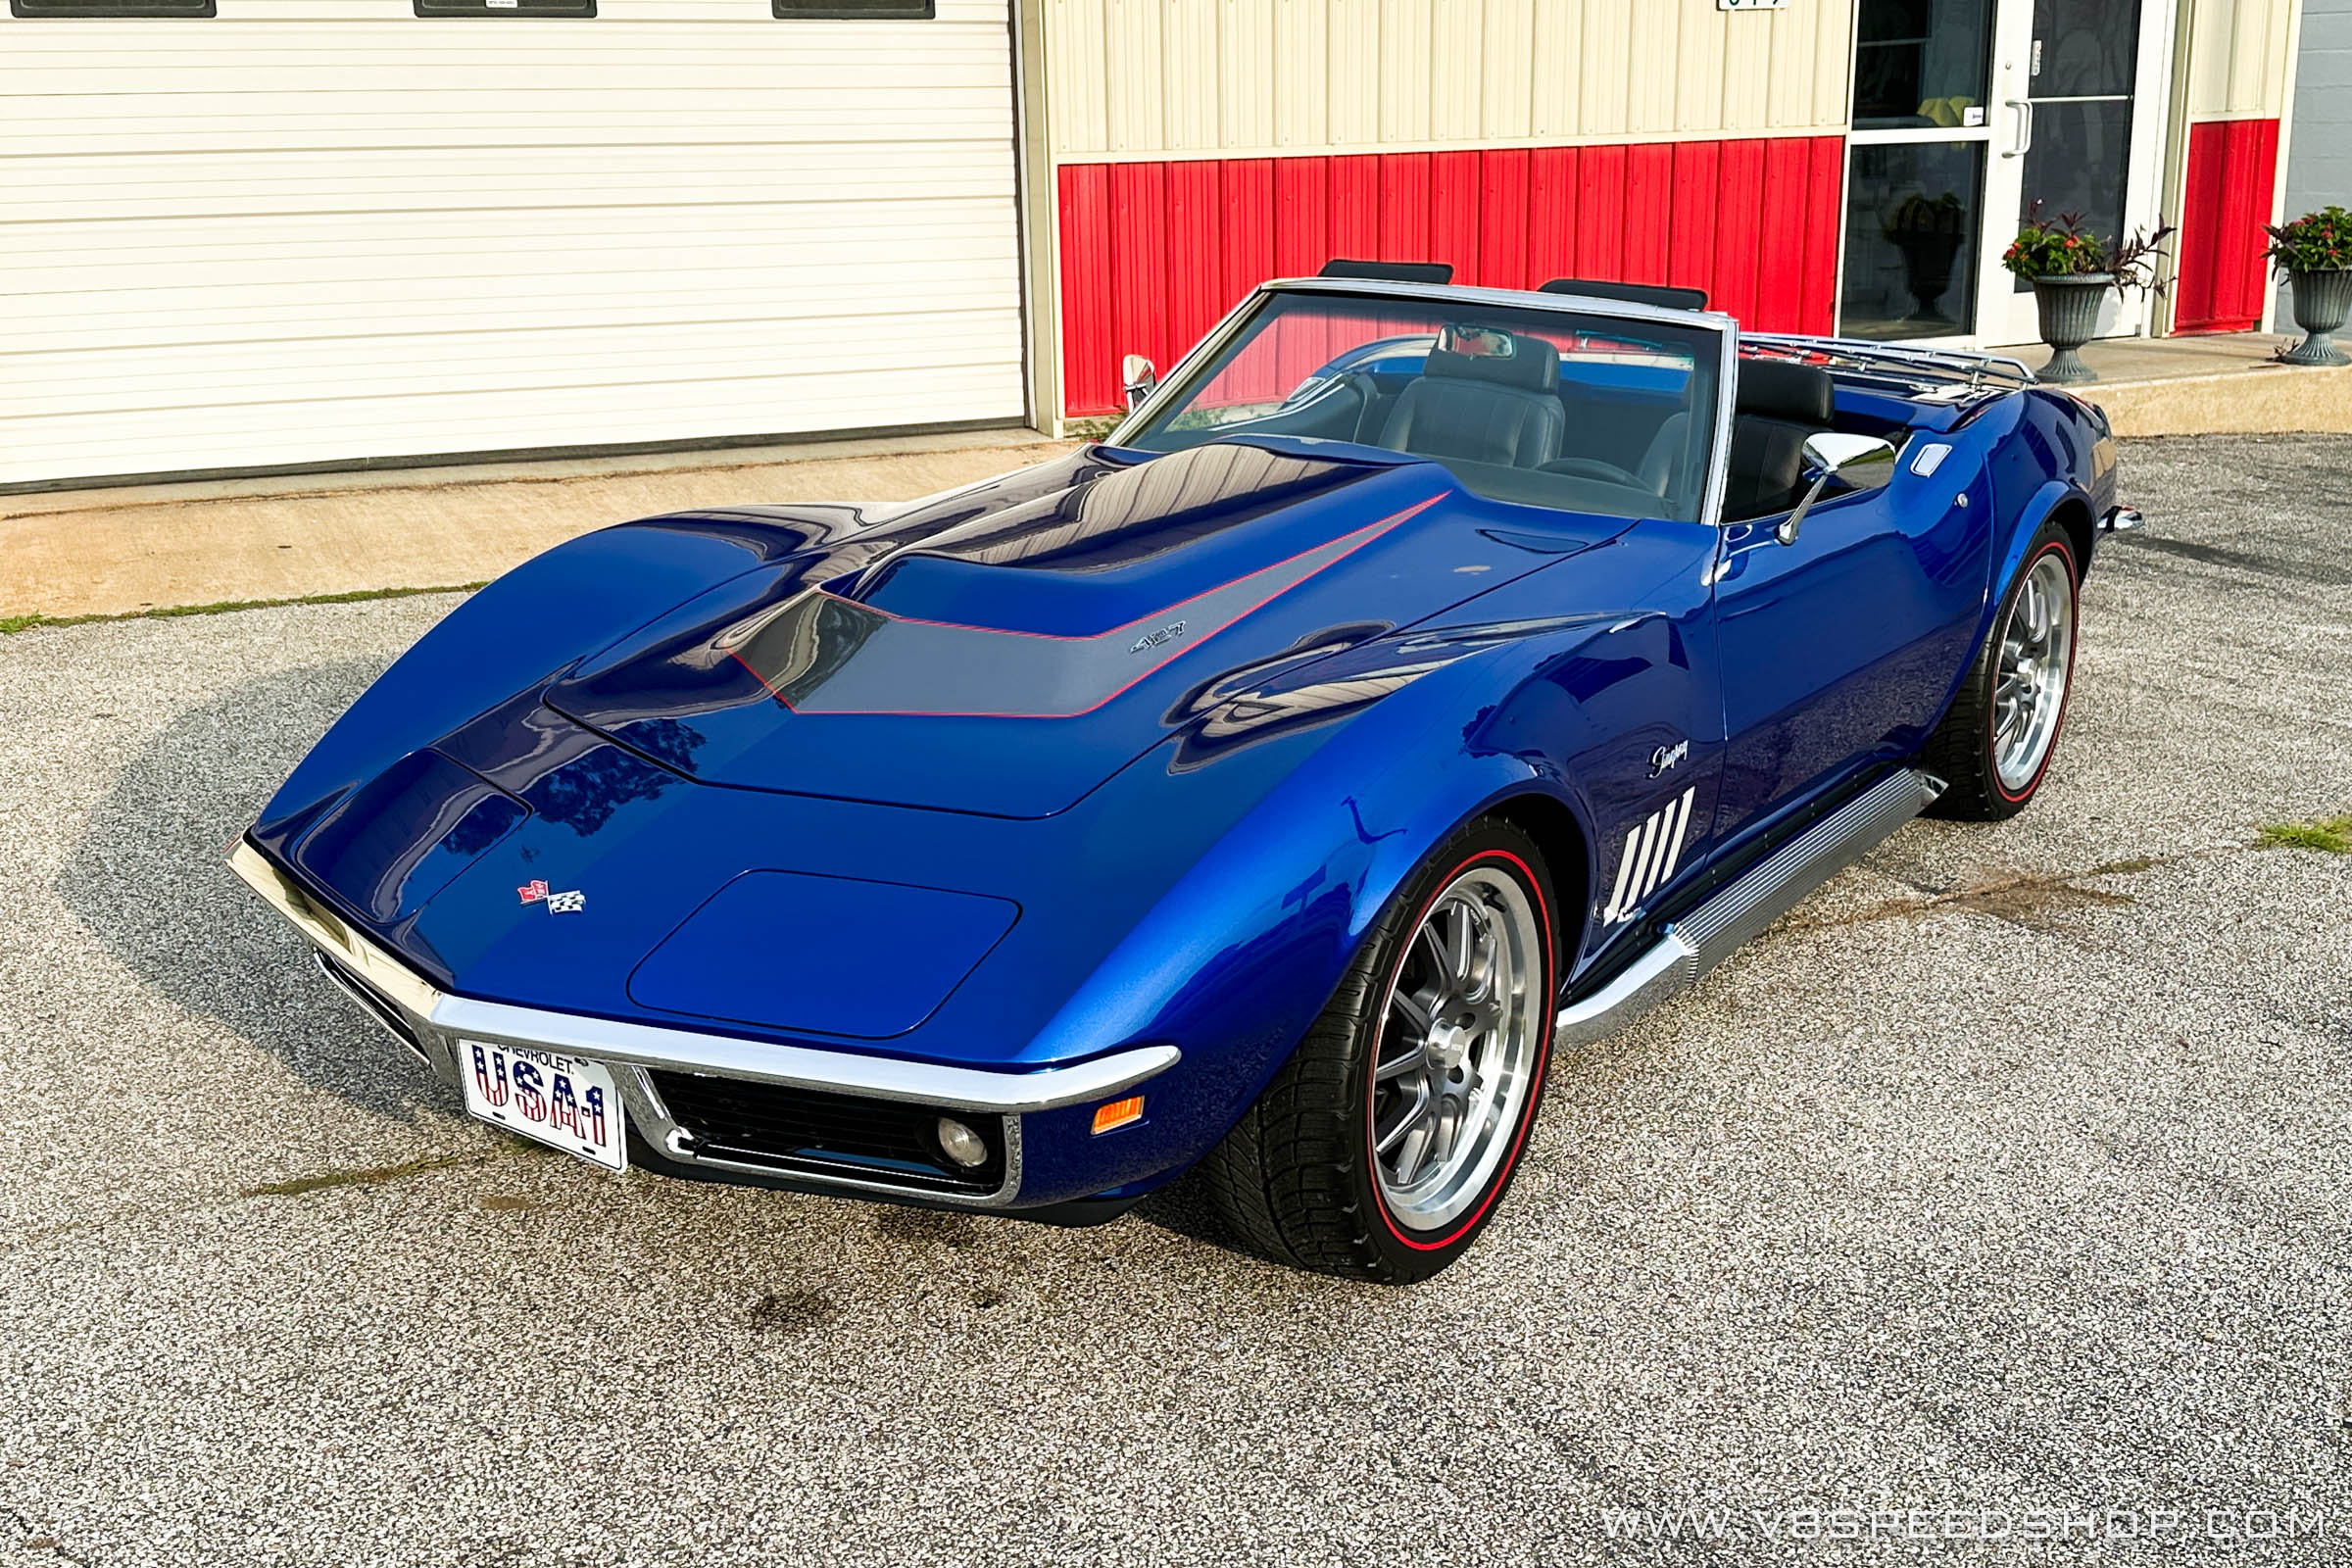 1969 Chevrolet Corvette Restoration and Upgrades at the V8 Speed and Resto Shop